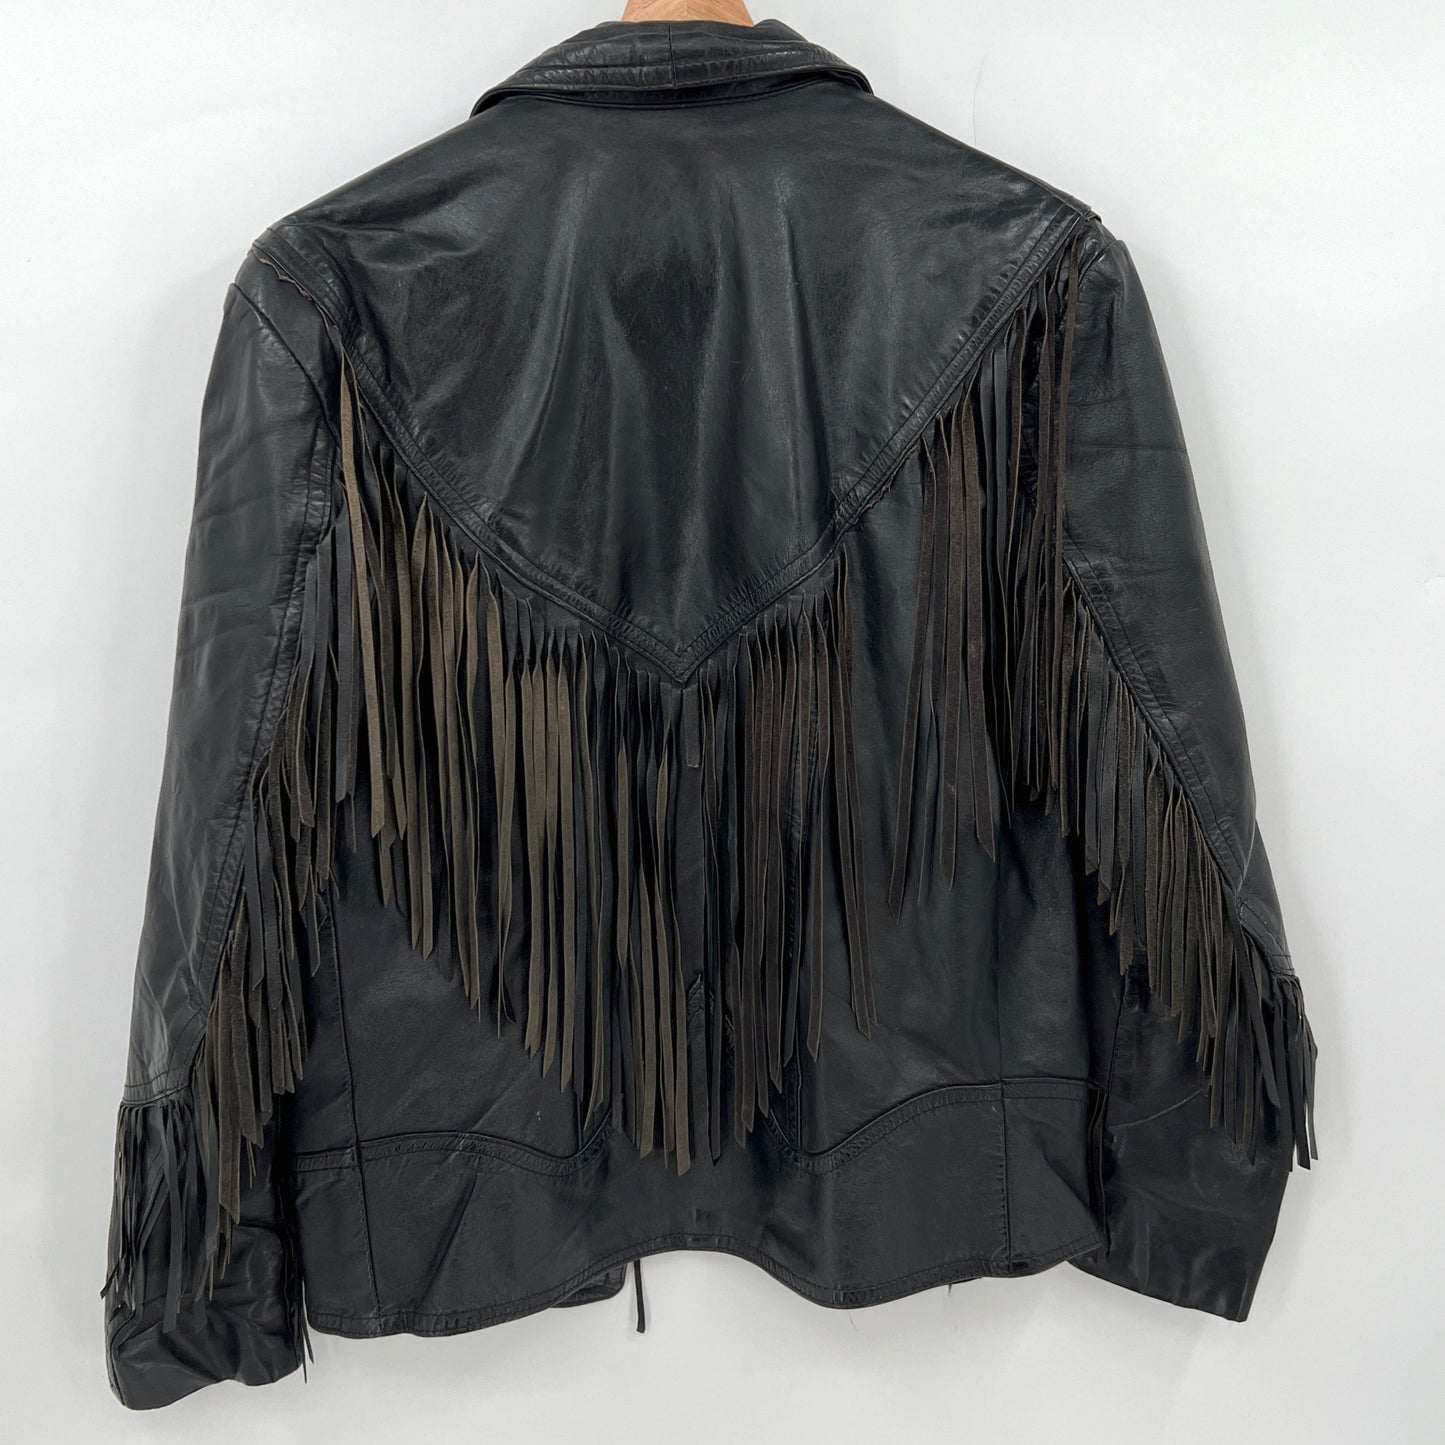 SOLD. Vintage The Leather Ranch Jacket (Fringe AS IS)